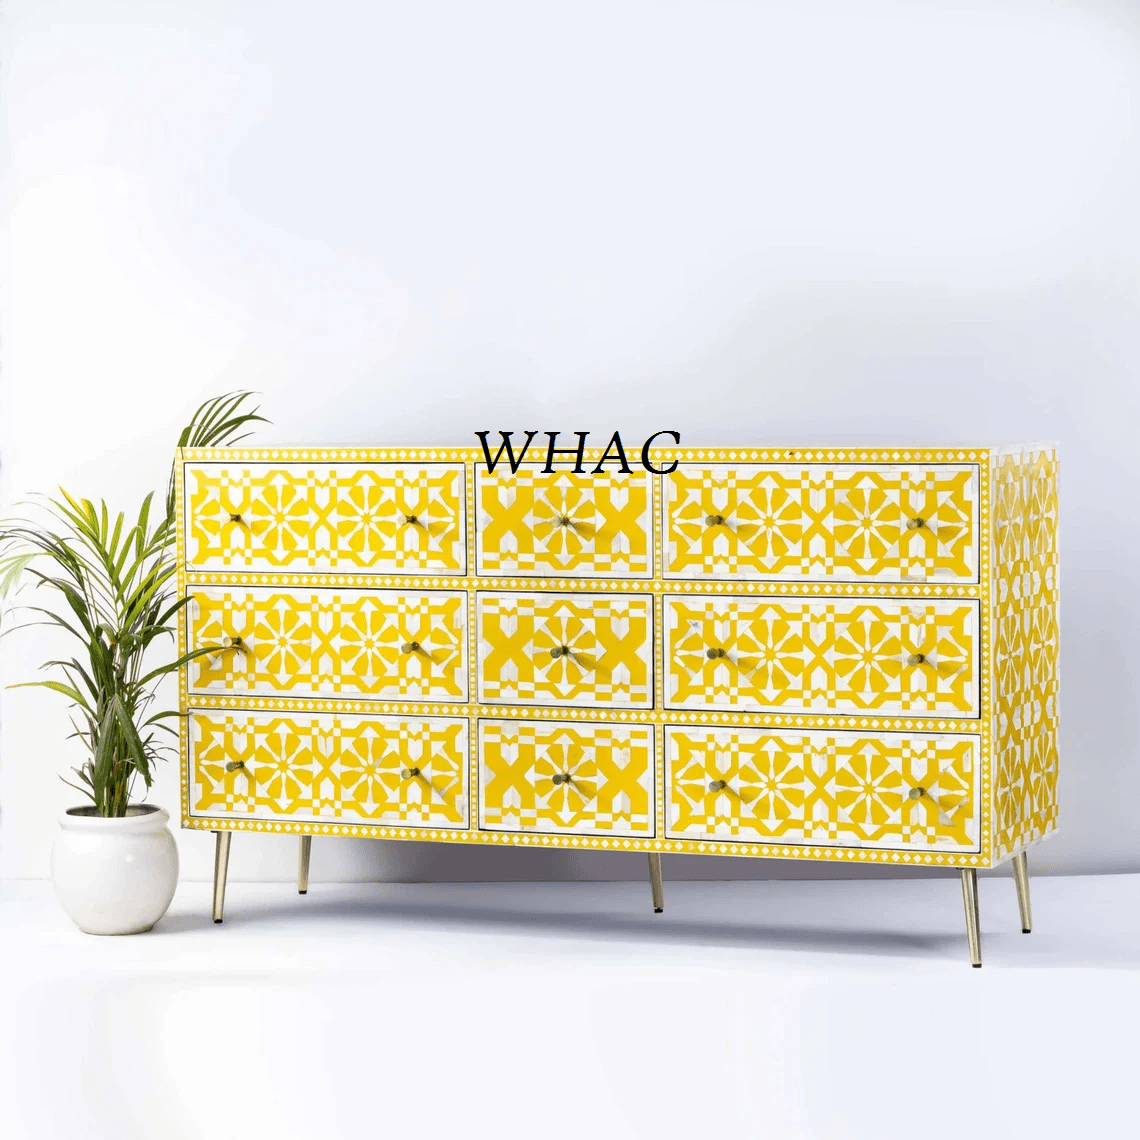 Handmade Bone Inlay Chest Of 9 Drawers in Yellow Color | Bone Inlay Storage Unit Chest of Drawers - Bone Inlay Furnitures